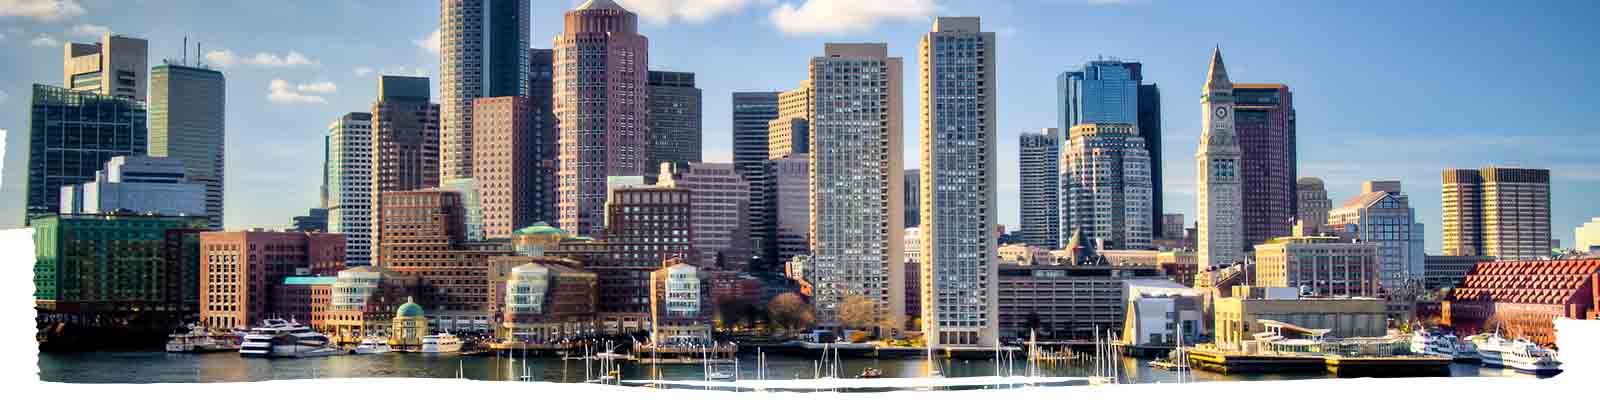 Skyline of downtown Boston, Massachusetts, from the waterfront